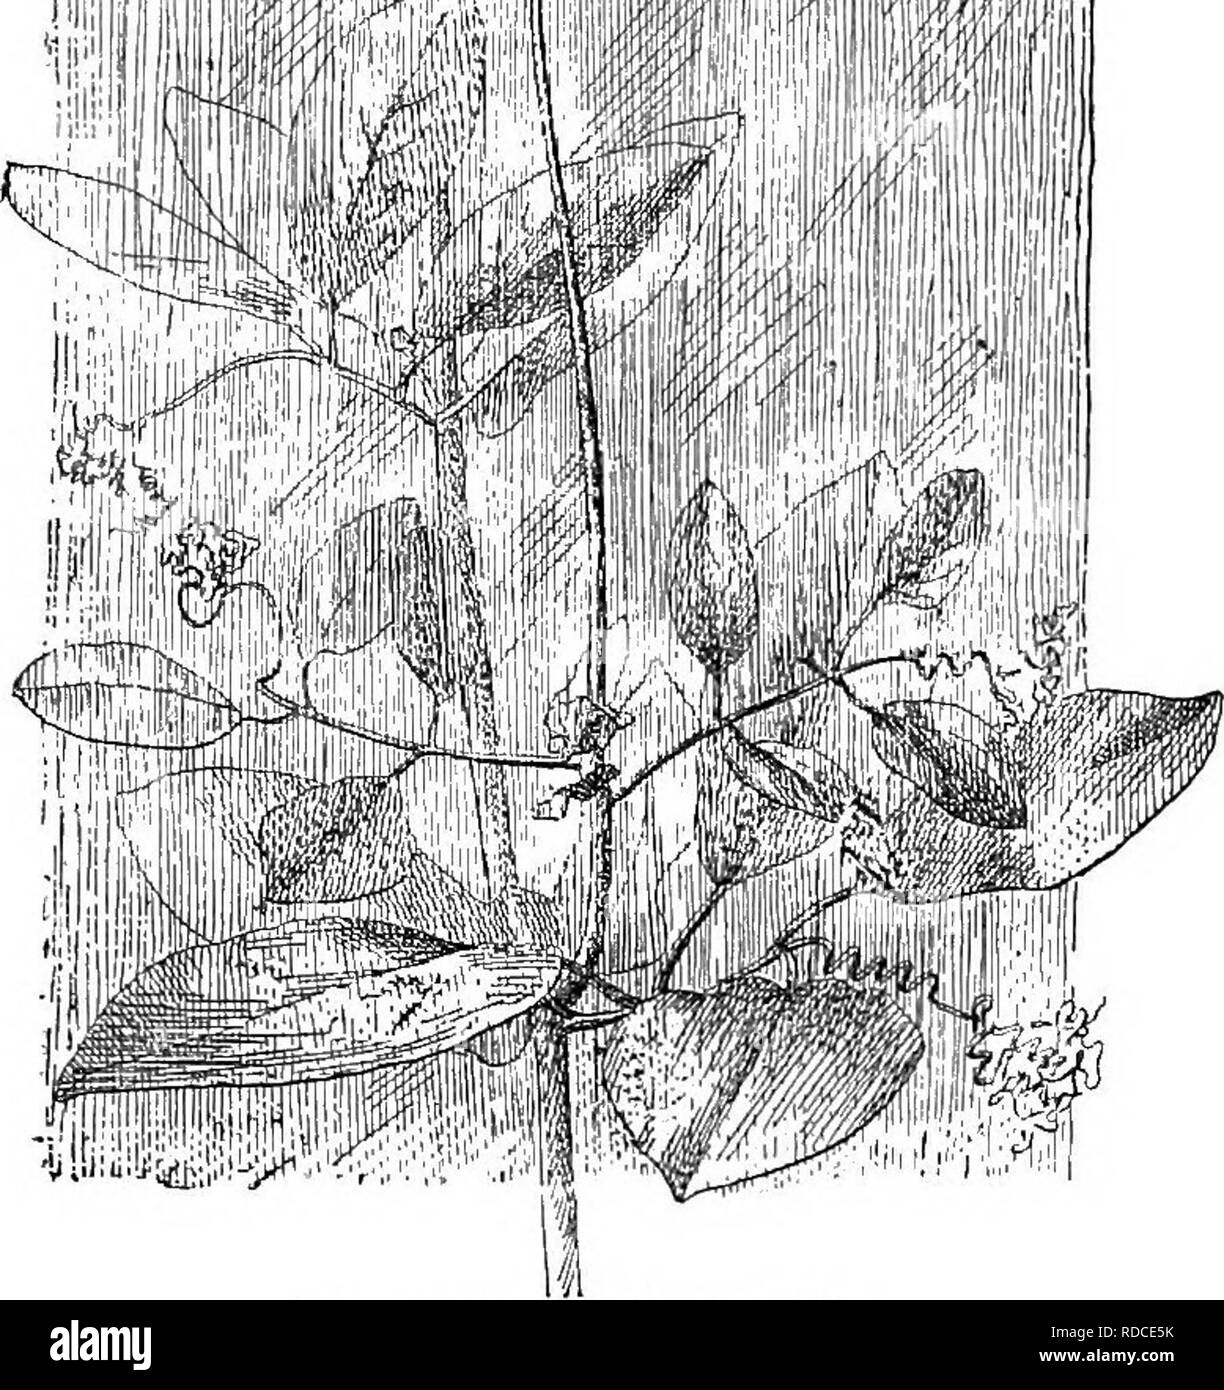 . Cyclopedia of American horticulture, comprising suggestions for cultivation of horticultural plants, descriptions of the species of fruits, vegetables, flowers, and ornamental plants sold in the United States and Canada, together with geographical and biographical sketches. Gardening. 502. Coboea scandens (X /s). SC&amp;ndens, Cav. Pigs. 502, 503, 504. Height 10-20 ft.: ifts. in 2 or 3 pairs, the lowest close to the stem, and more or less eared : fls. bell-shaped, 1-lK in. across, light violet or greenish purple, with protruding style and stamens: tendrils branched. Mex. B.M. 851. There is a Stock Photo